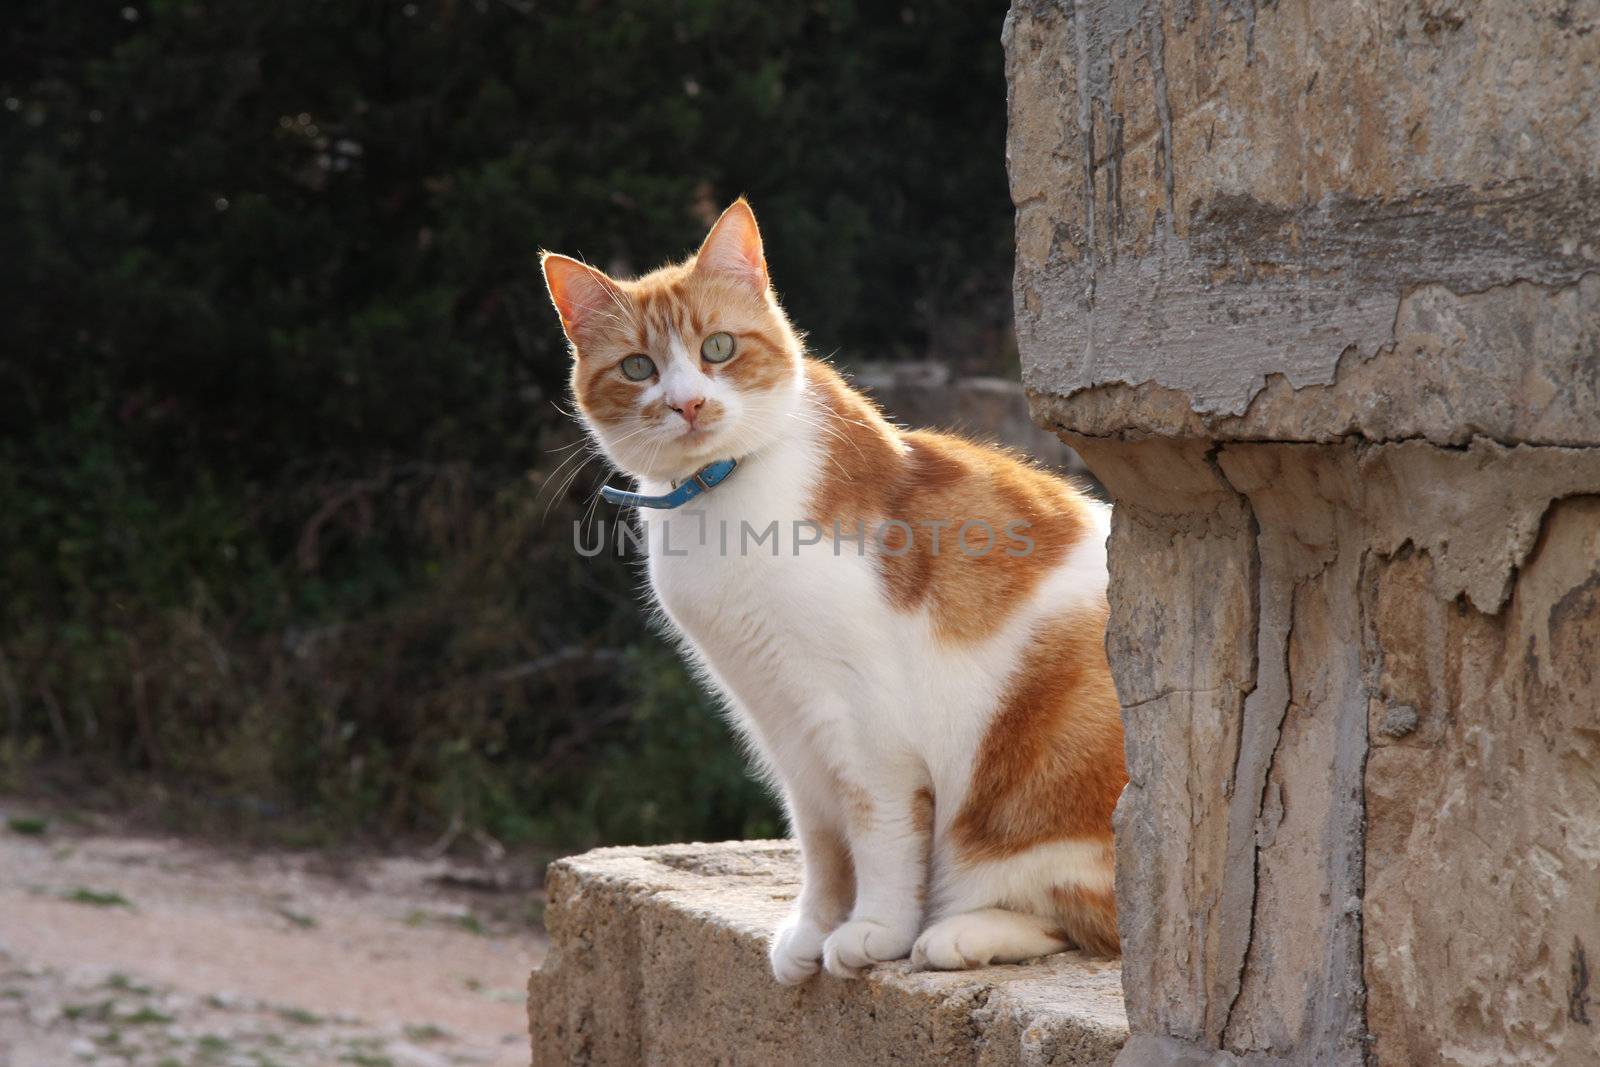 A domesticated ginger cat sits on a wall outdoors, looking at the camera